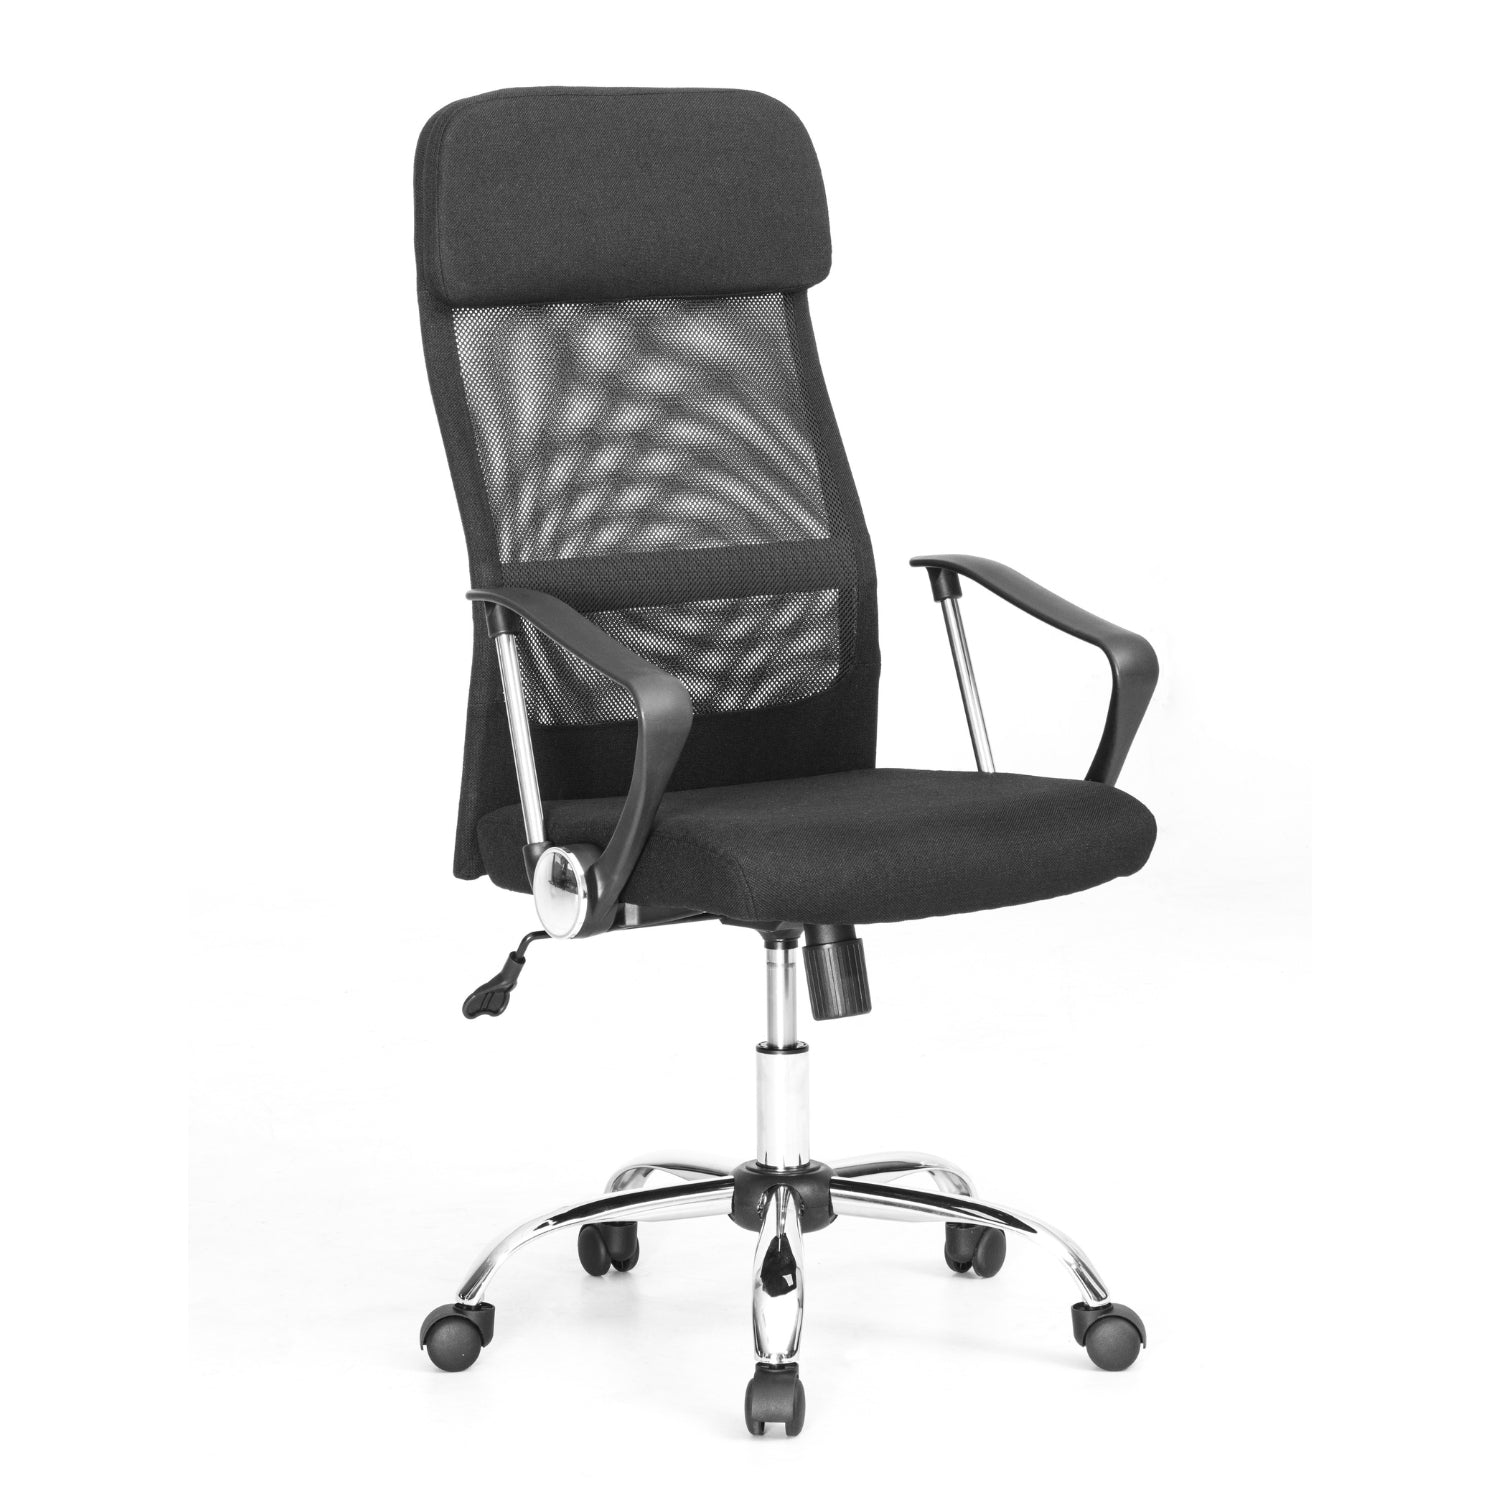 clio sleek black office chair with chrome wheels and arms.